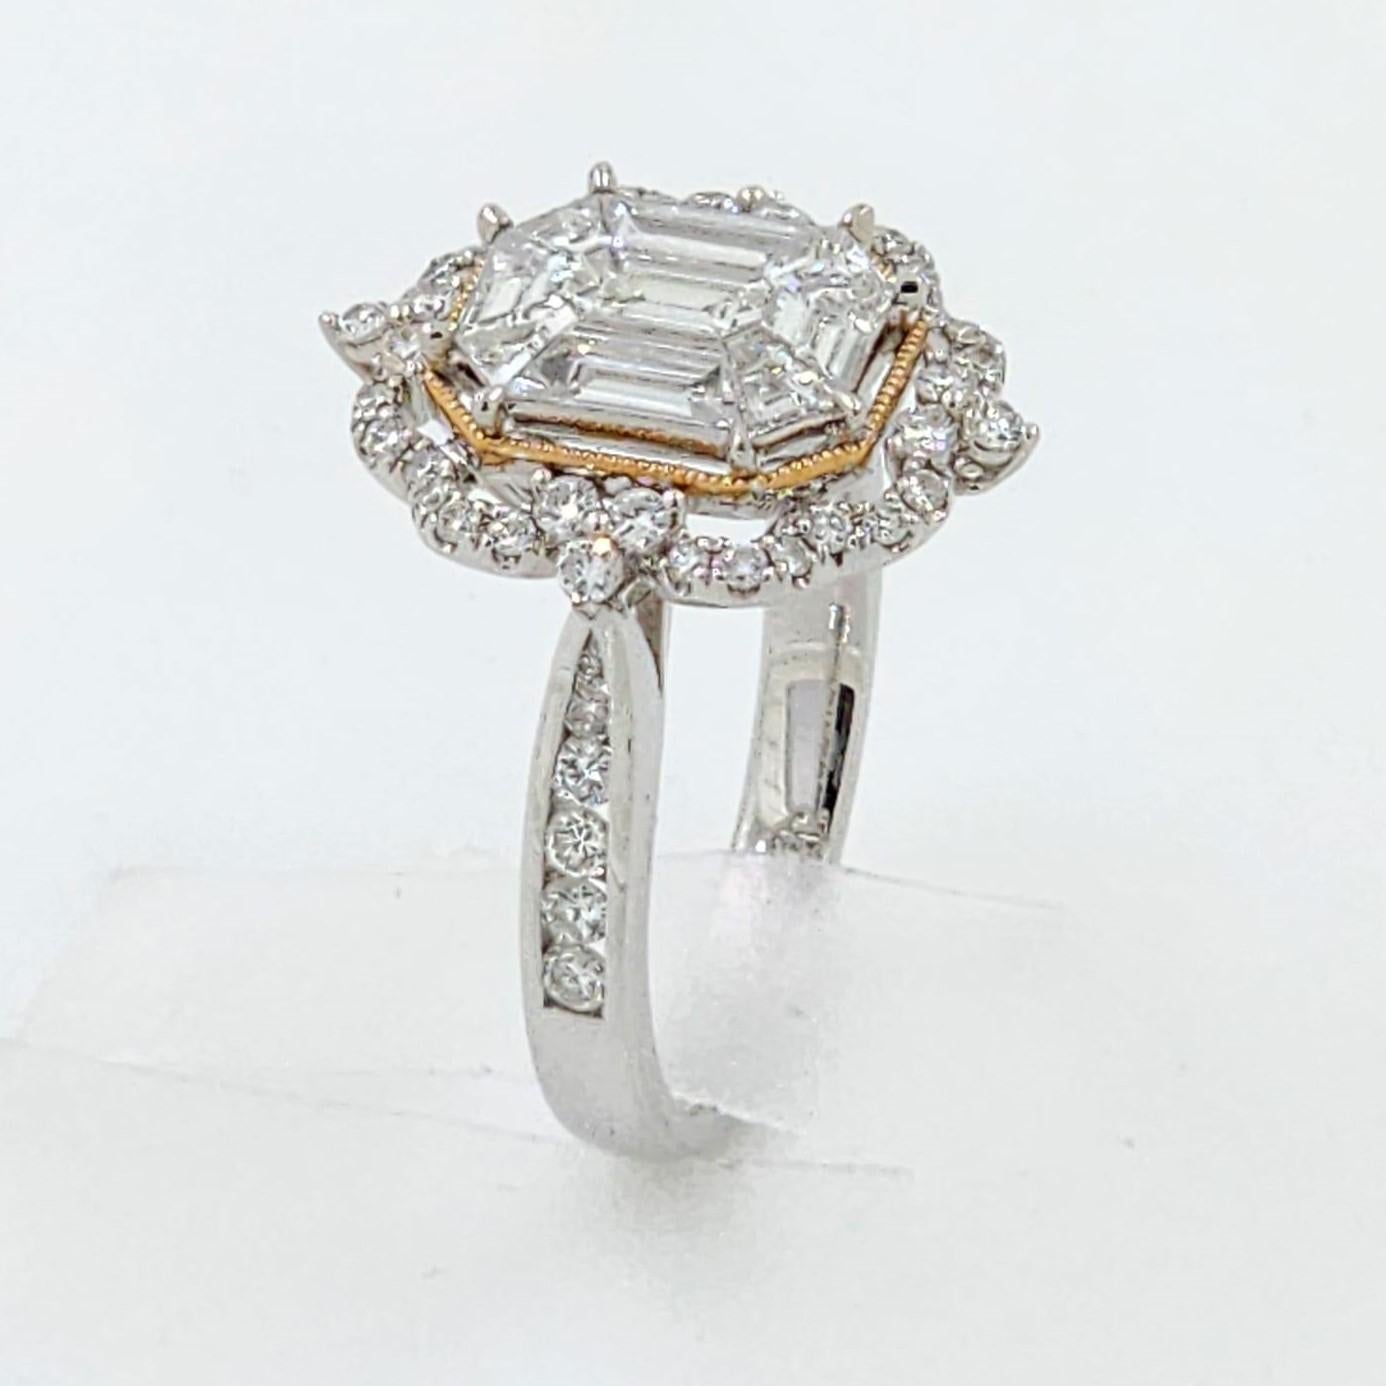 Contemporary 1.02 Carat Illusion Setting Diamonds Ring in 18K White Gold For Sale